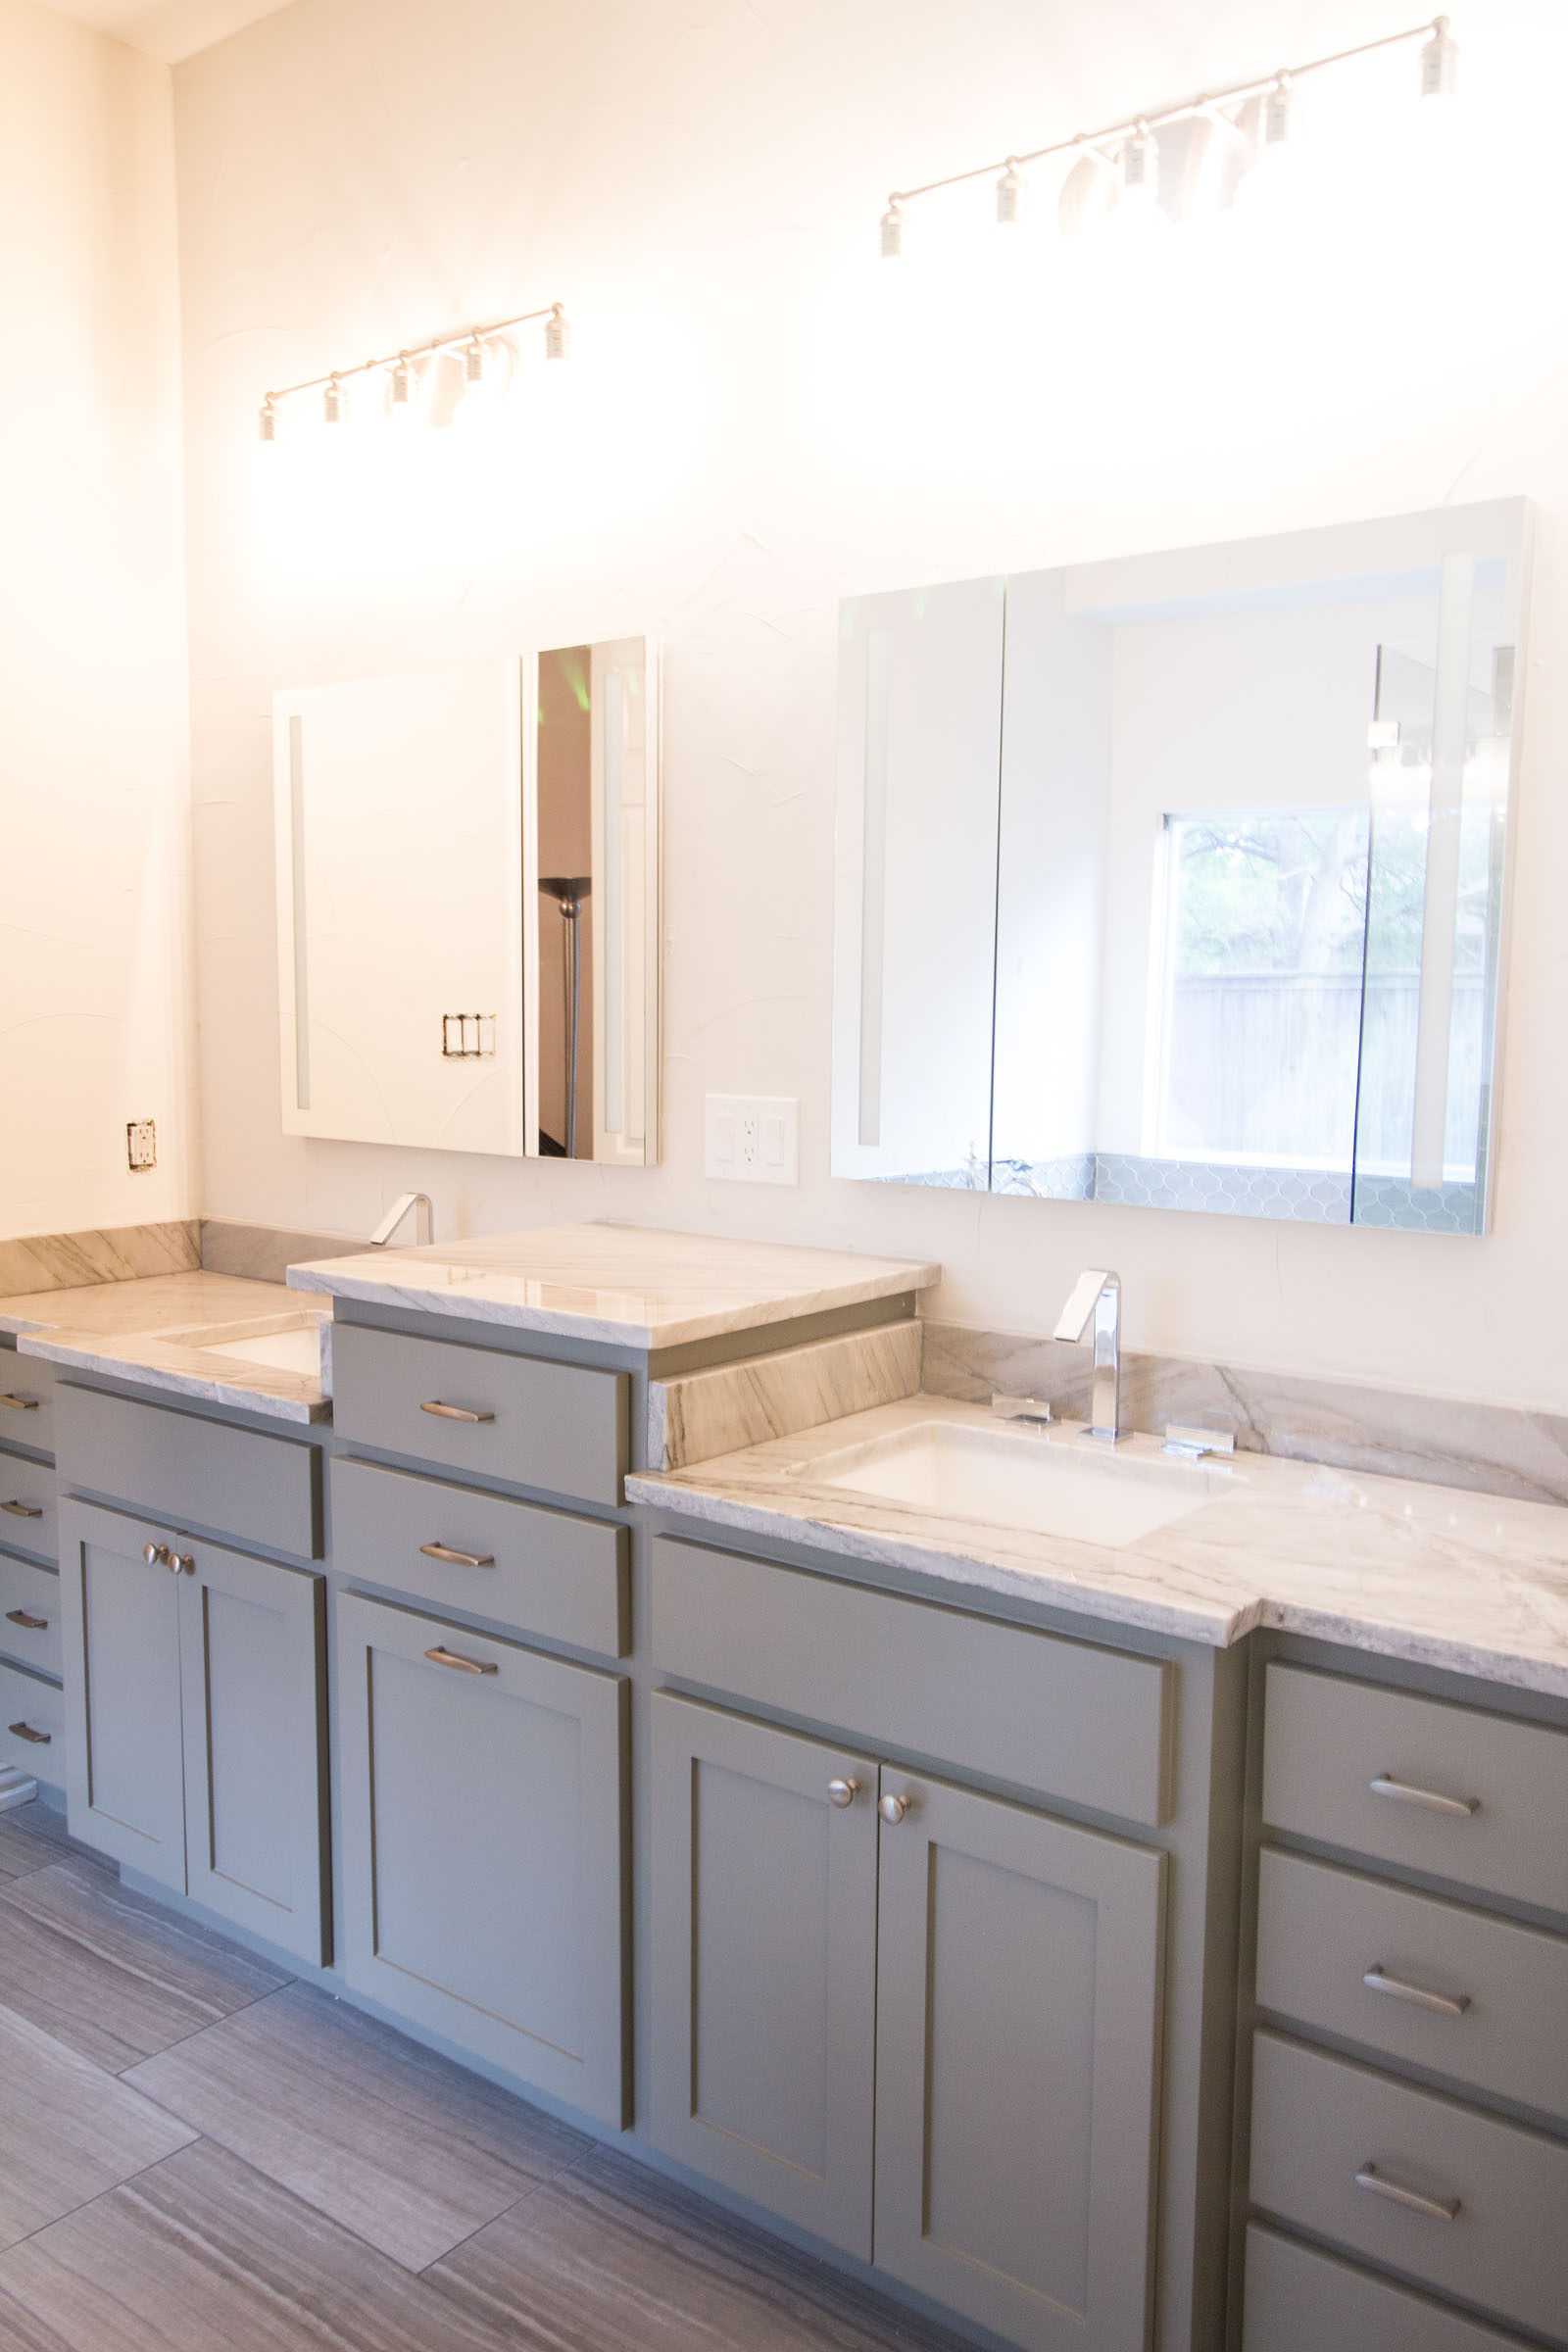 Contemporary bathroom remodel, grey cabinets, bright lighting, lots of counter space